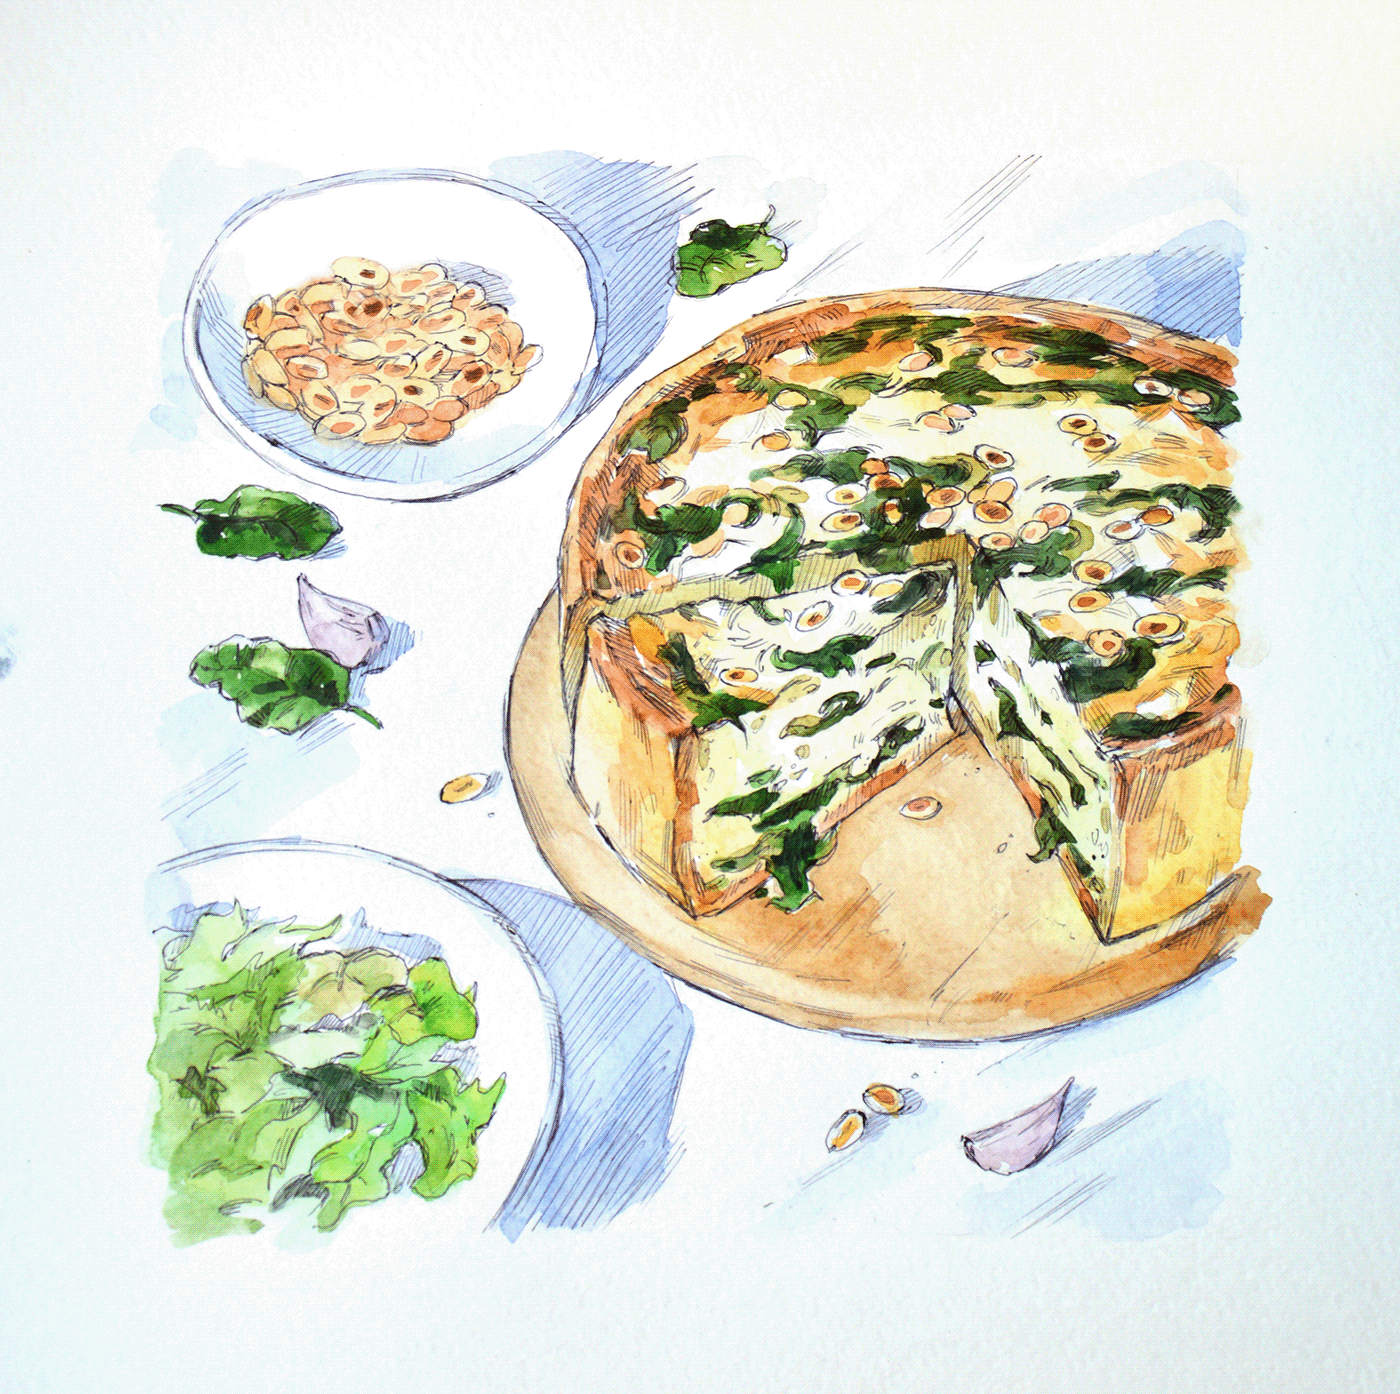 Spinach and Goat cheese quiche